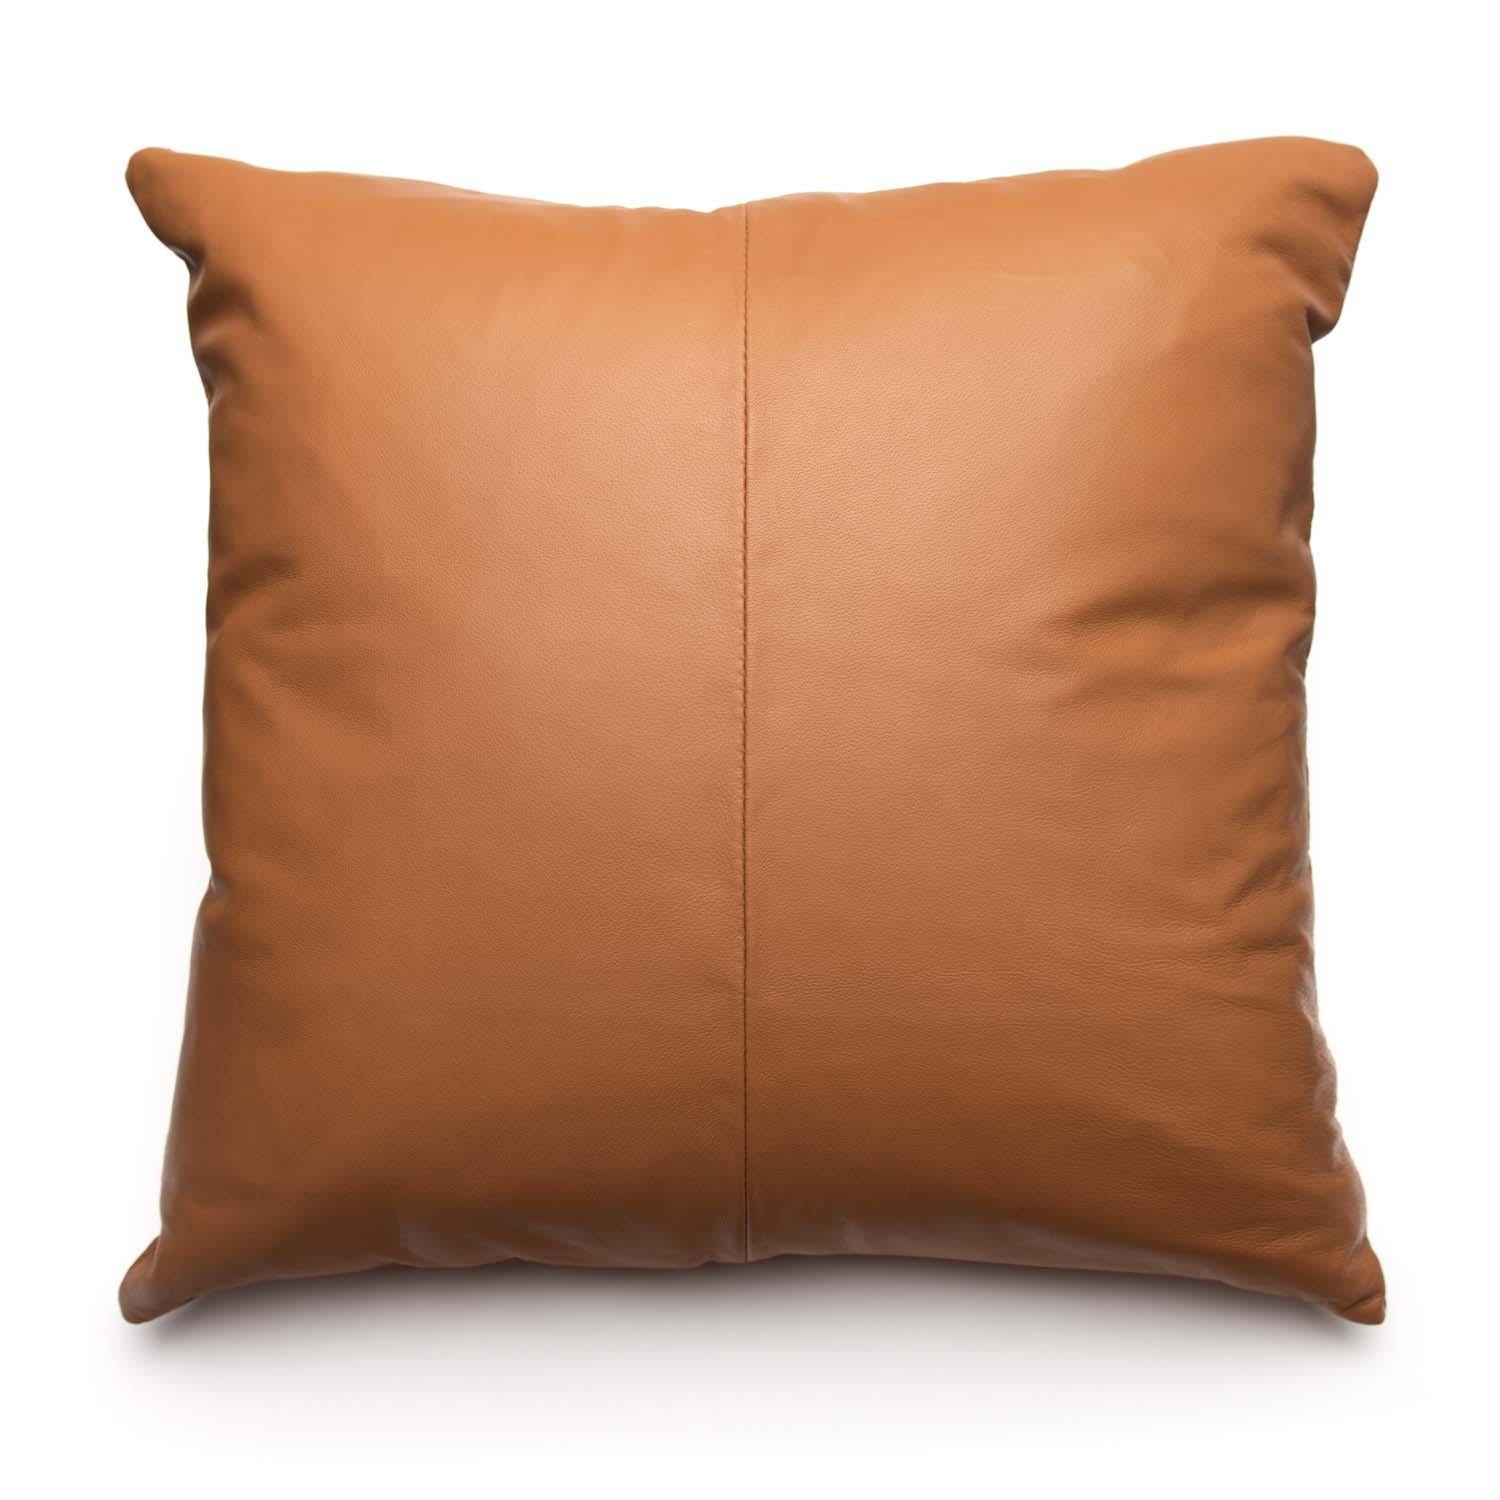 Create a fresh and stylish designer look with this deluxe tan leather pillow. Intricately handcrafted using honored time leather craftsmanship paired back with eclectic contemporary design. Measures: 16 x 16